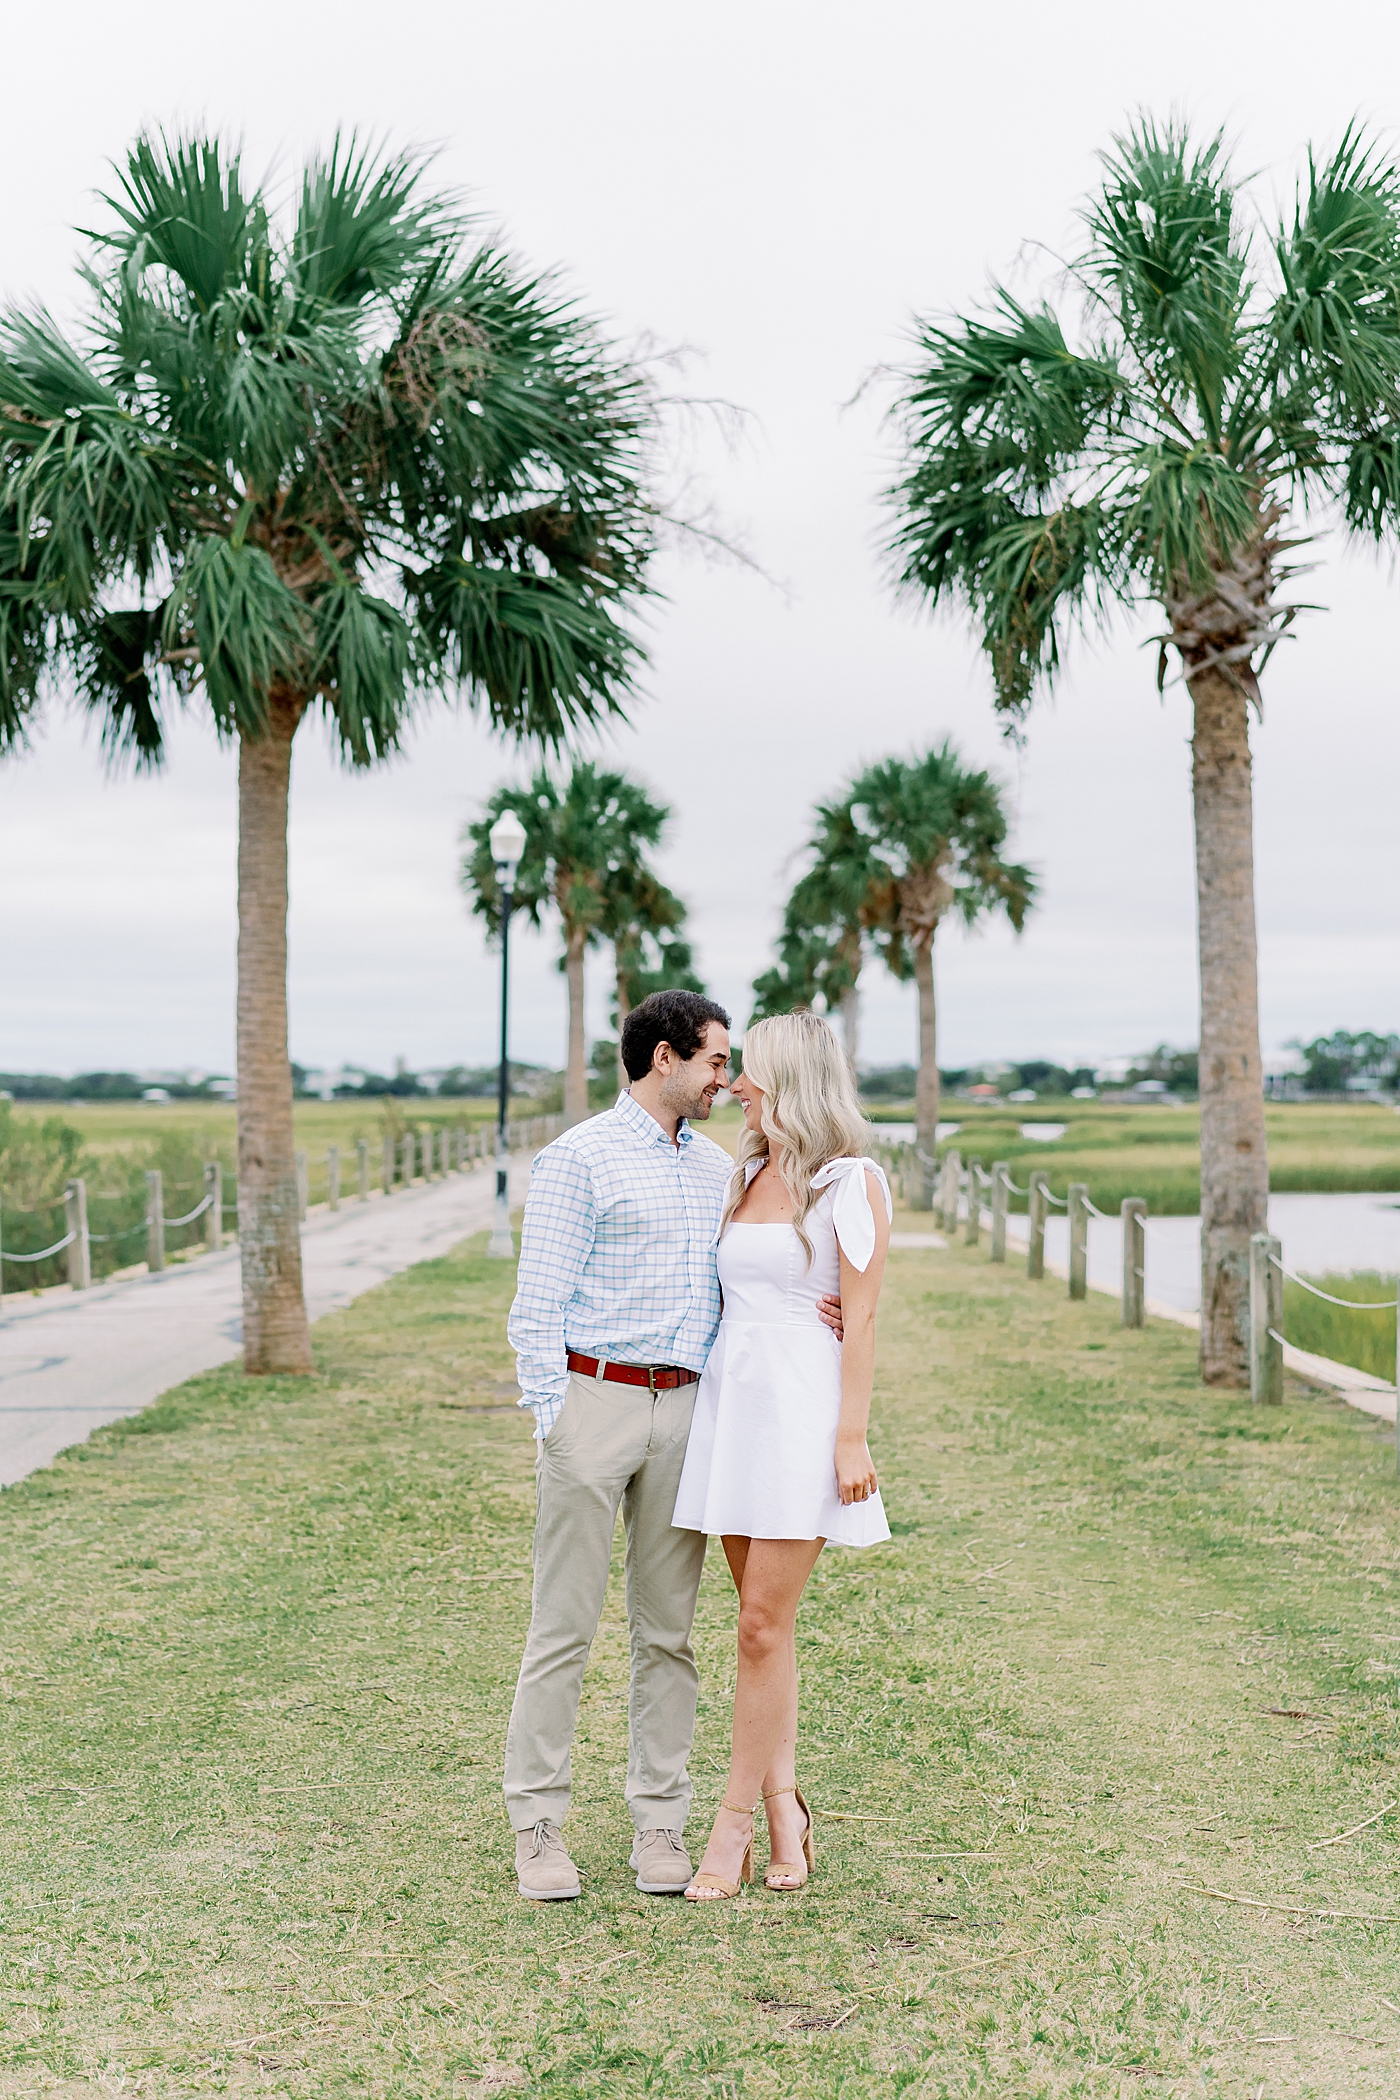 Couple together on the Pitt St Bridge | Intimate Charleston Engagement Session with Annie Laura Photo